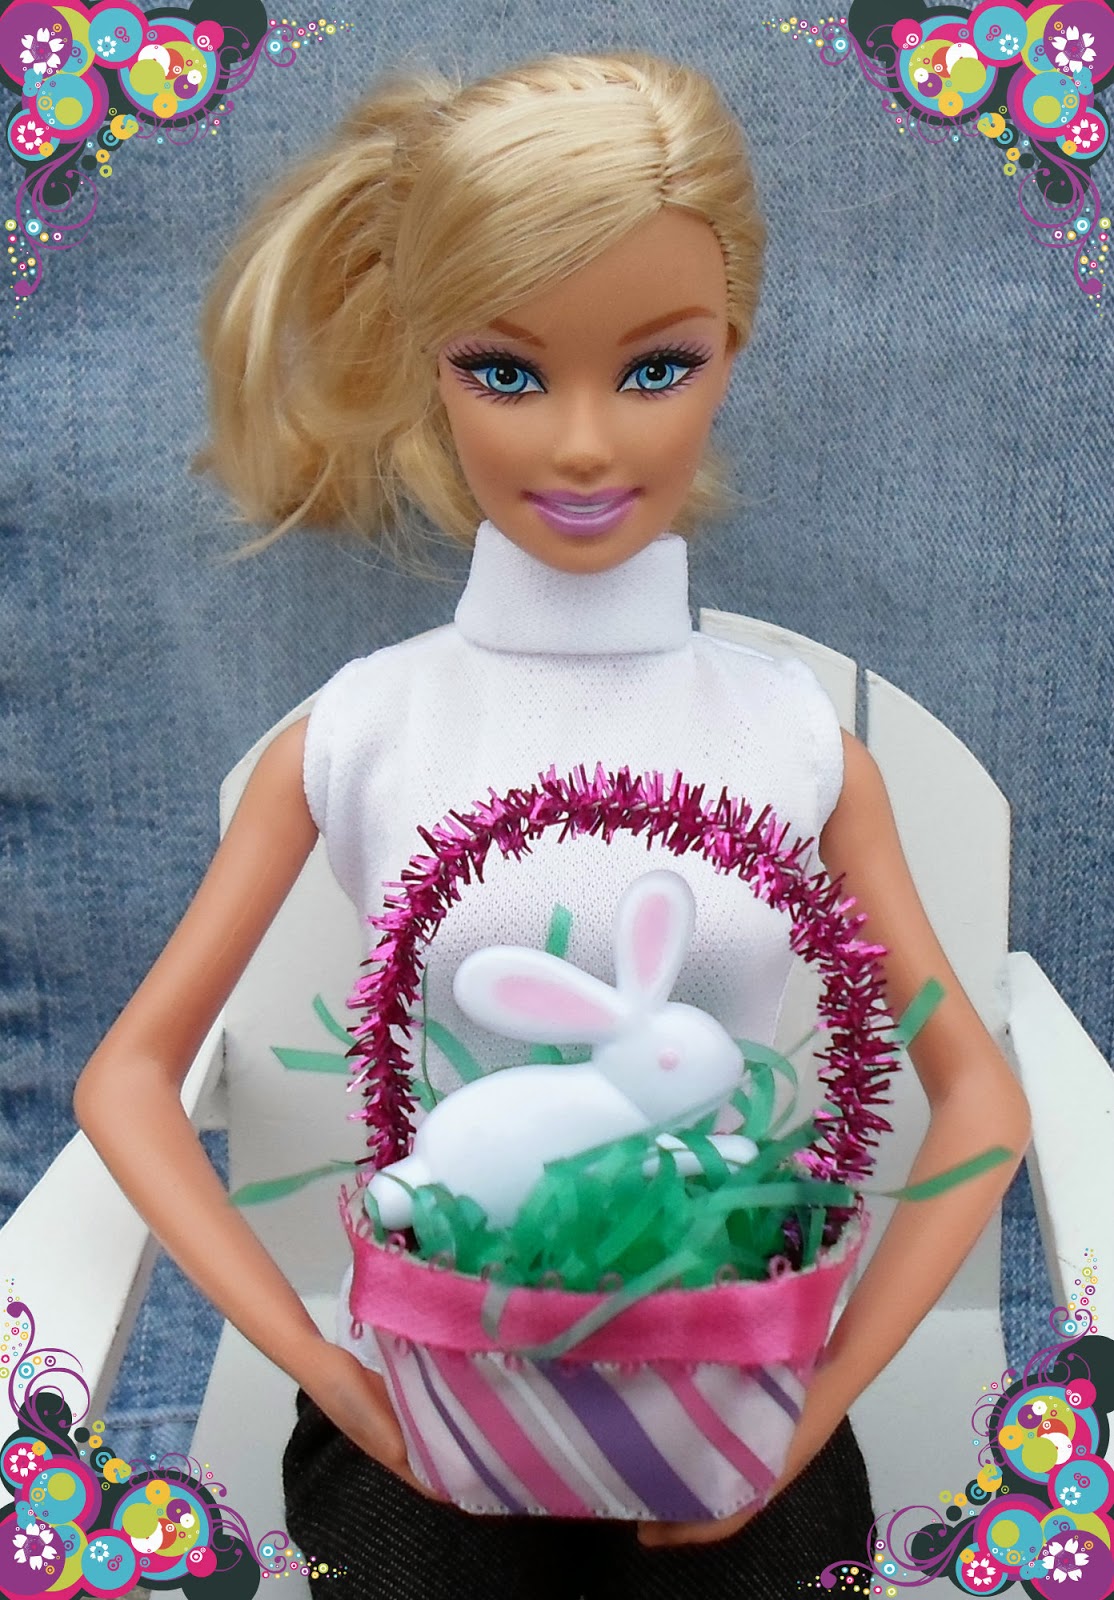 Happier Than A Pig In Mud: Easter Basket for Barbie from Egg Carton